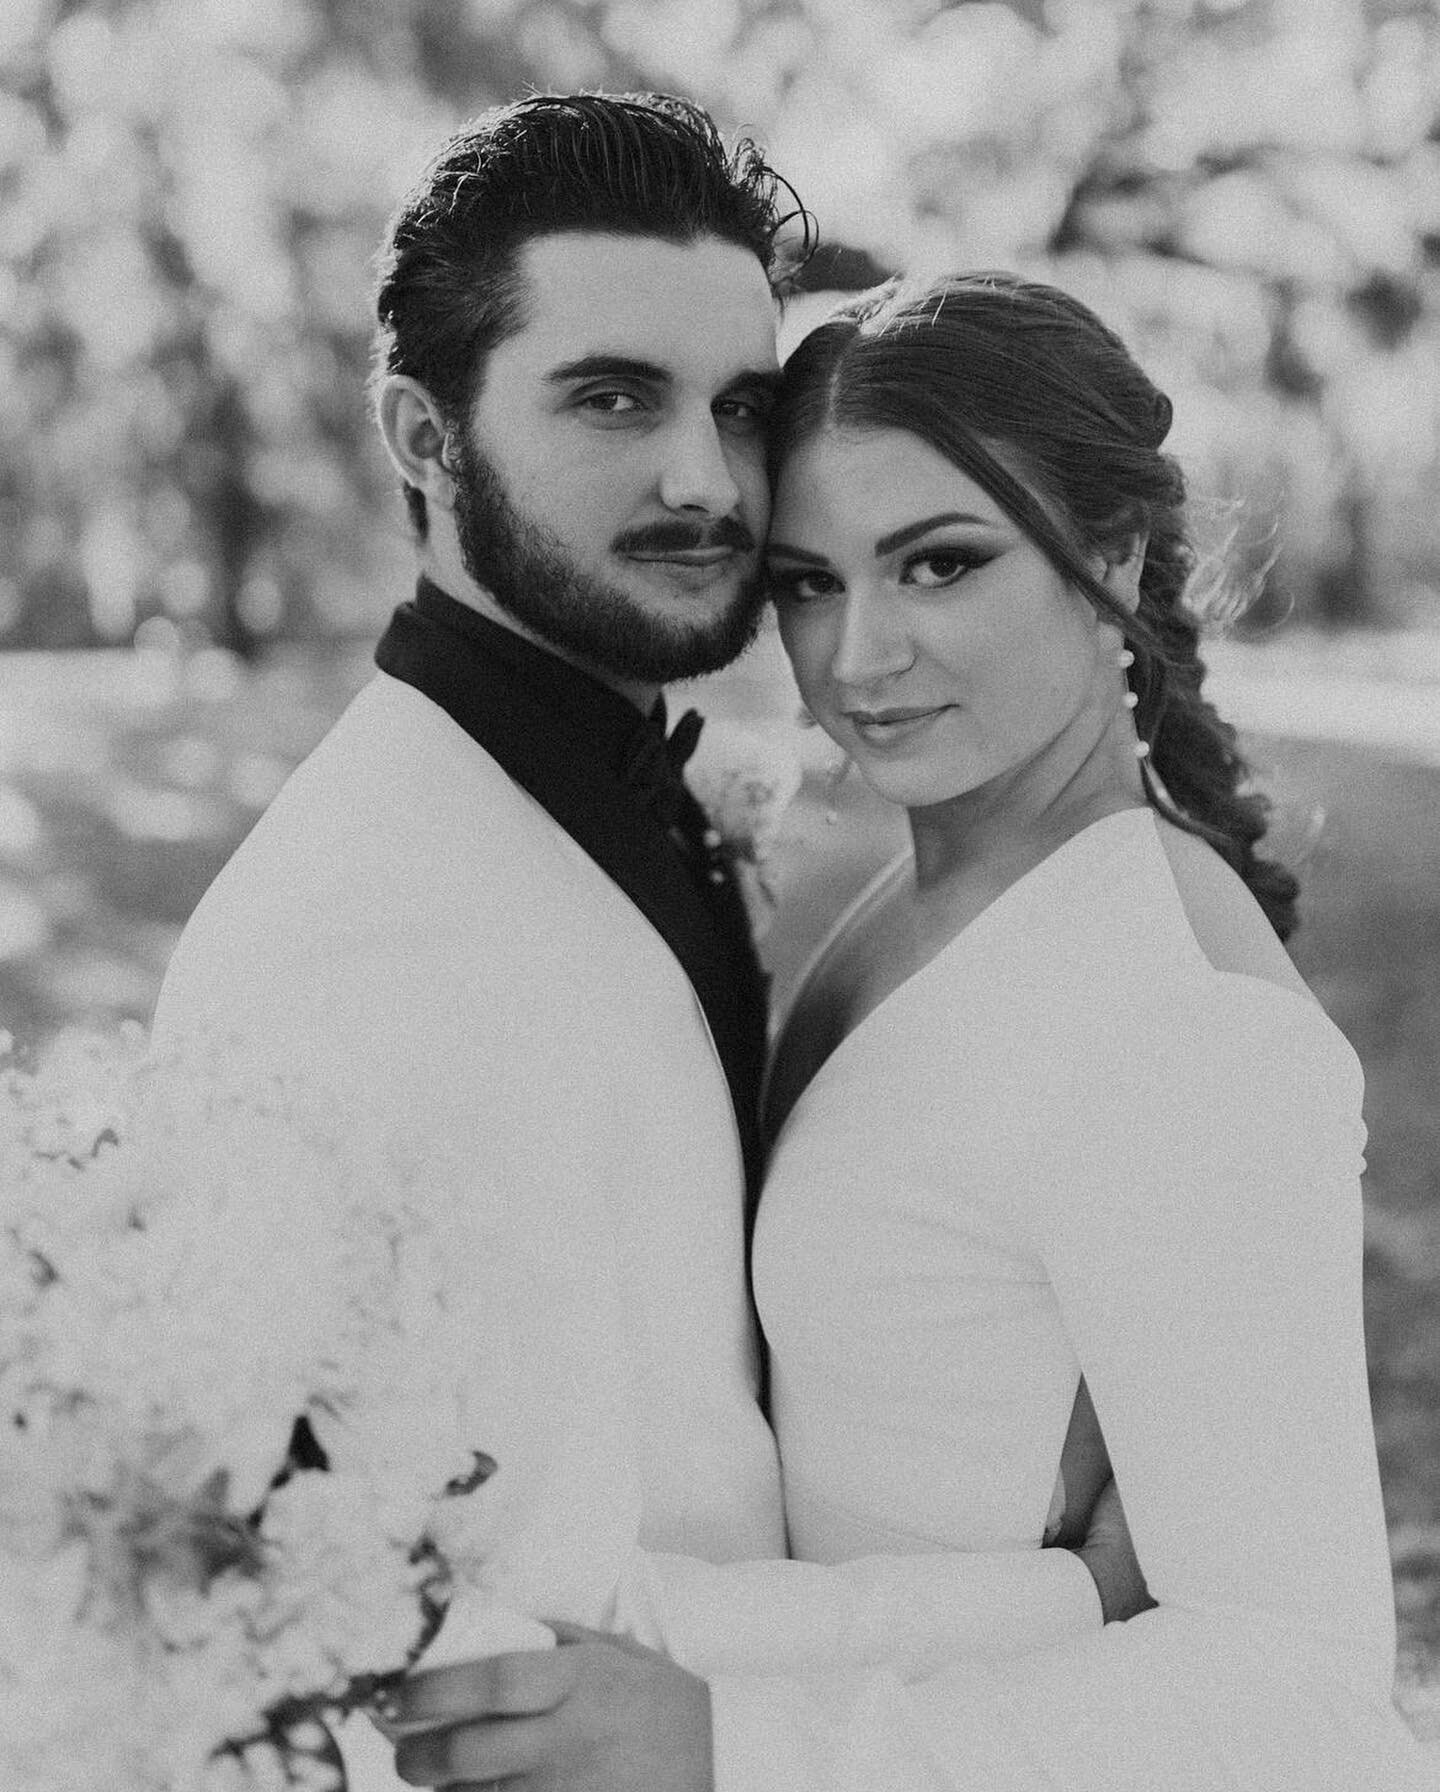 When the makeup hits even in black and white 🤍🖤 
Photos @beccakrisukphotography 
#savannahweddings #savannahmakeupartist #savannahwedding #savannahbride #bridemakeup #blufftonwedding #blufftonweddings #blufftonmakeupartist #hiltonheadwedding #hilto